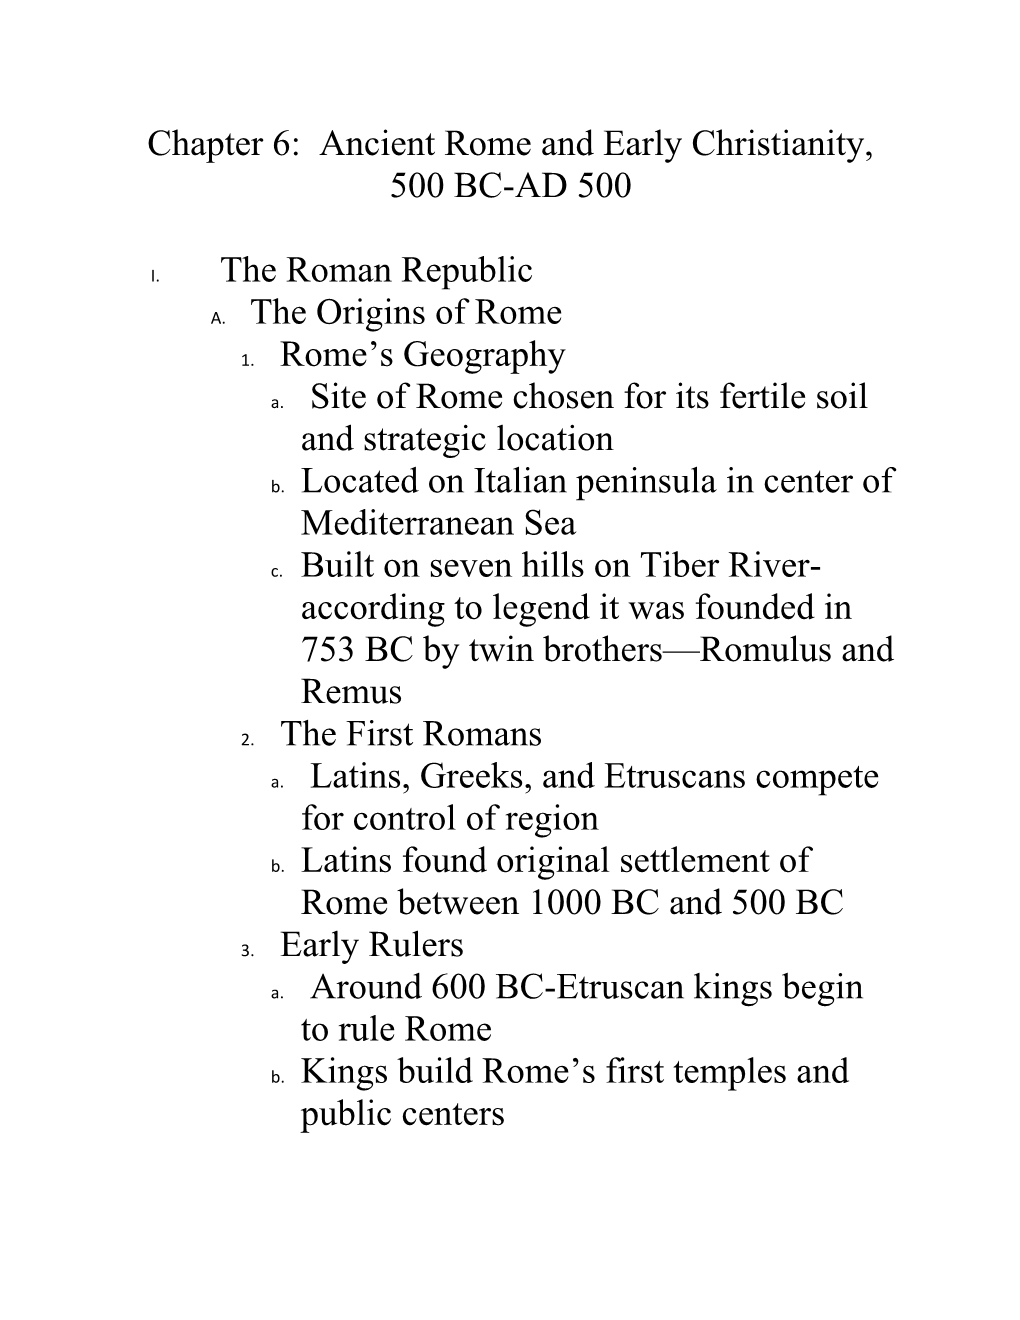 Chapter 6: Ancient Rome and Early Christianity, 500 BC-AD 500